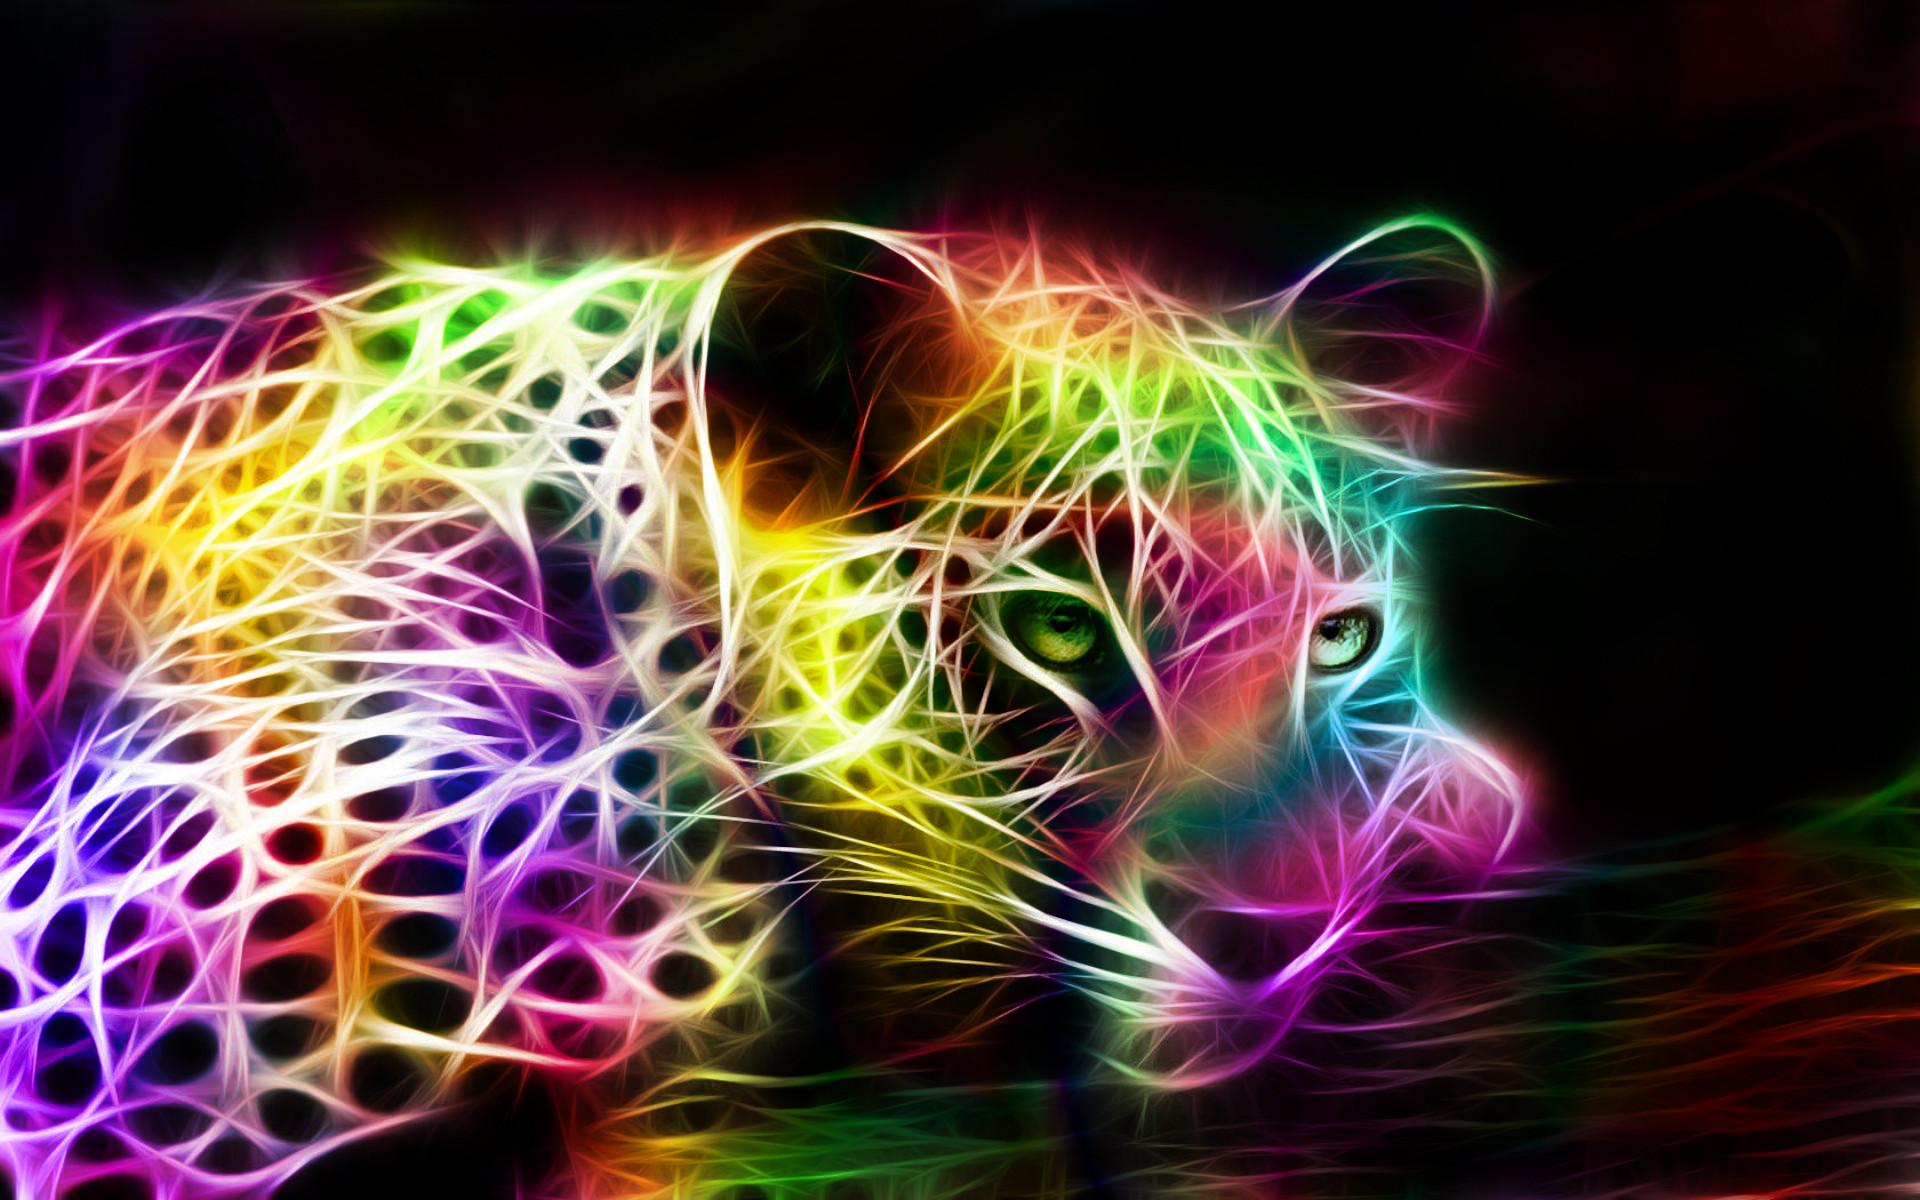 Rainbow Fractal Wallpapers - Top Free Rainbow Fractal Backgrounds ...